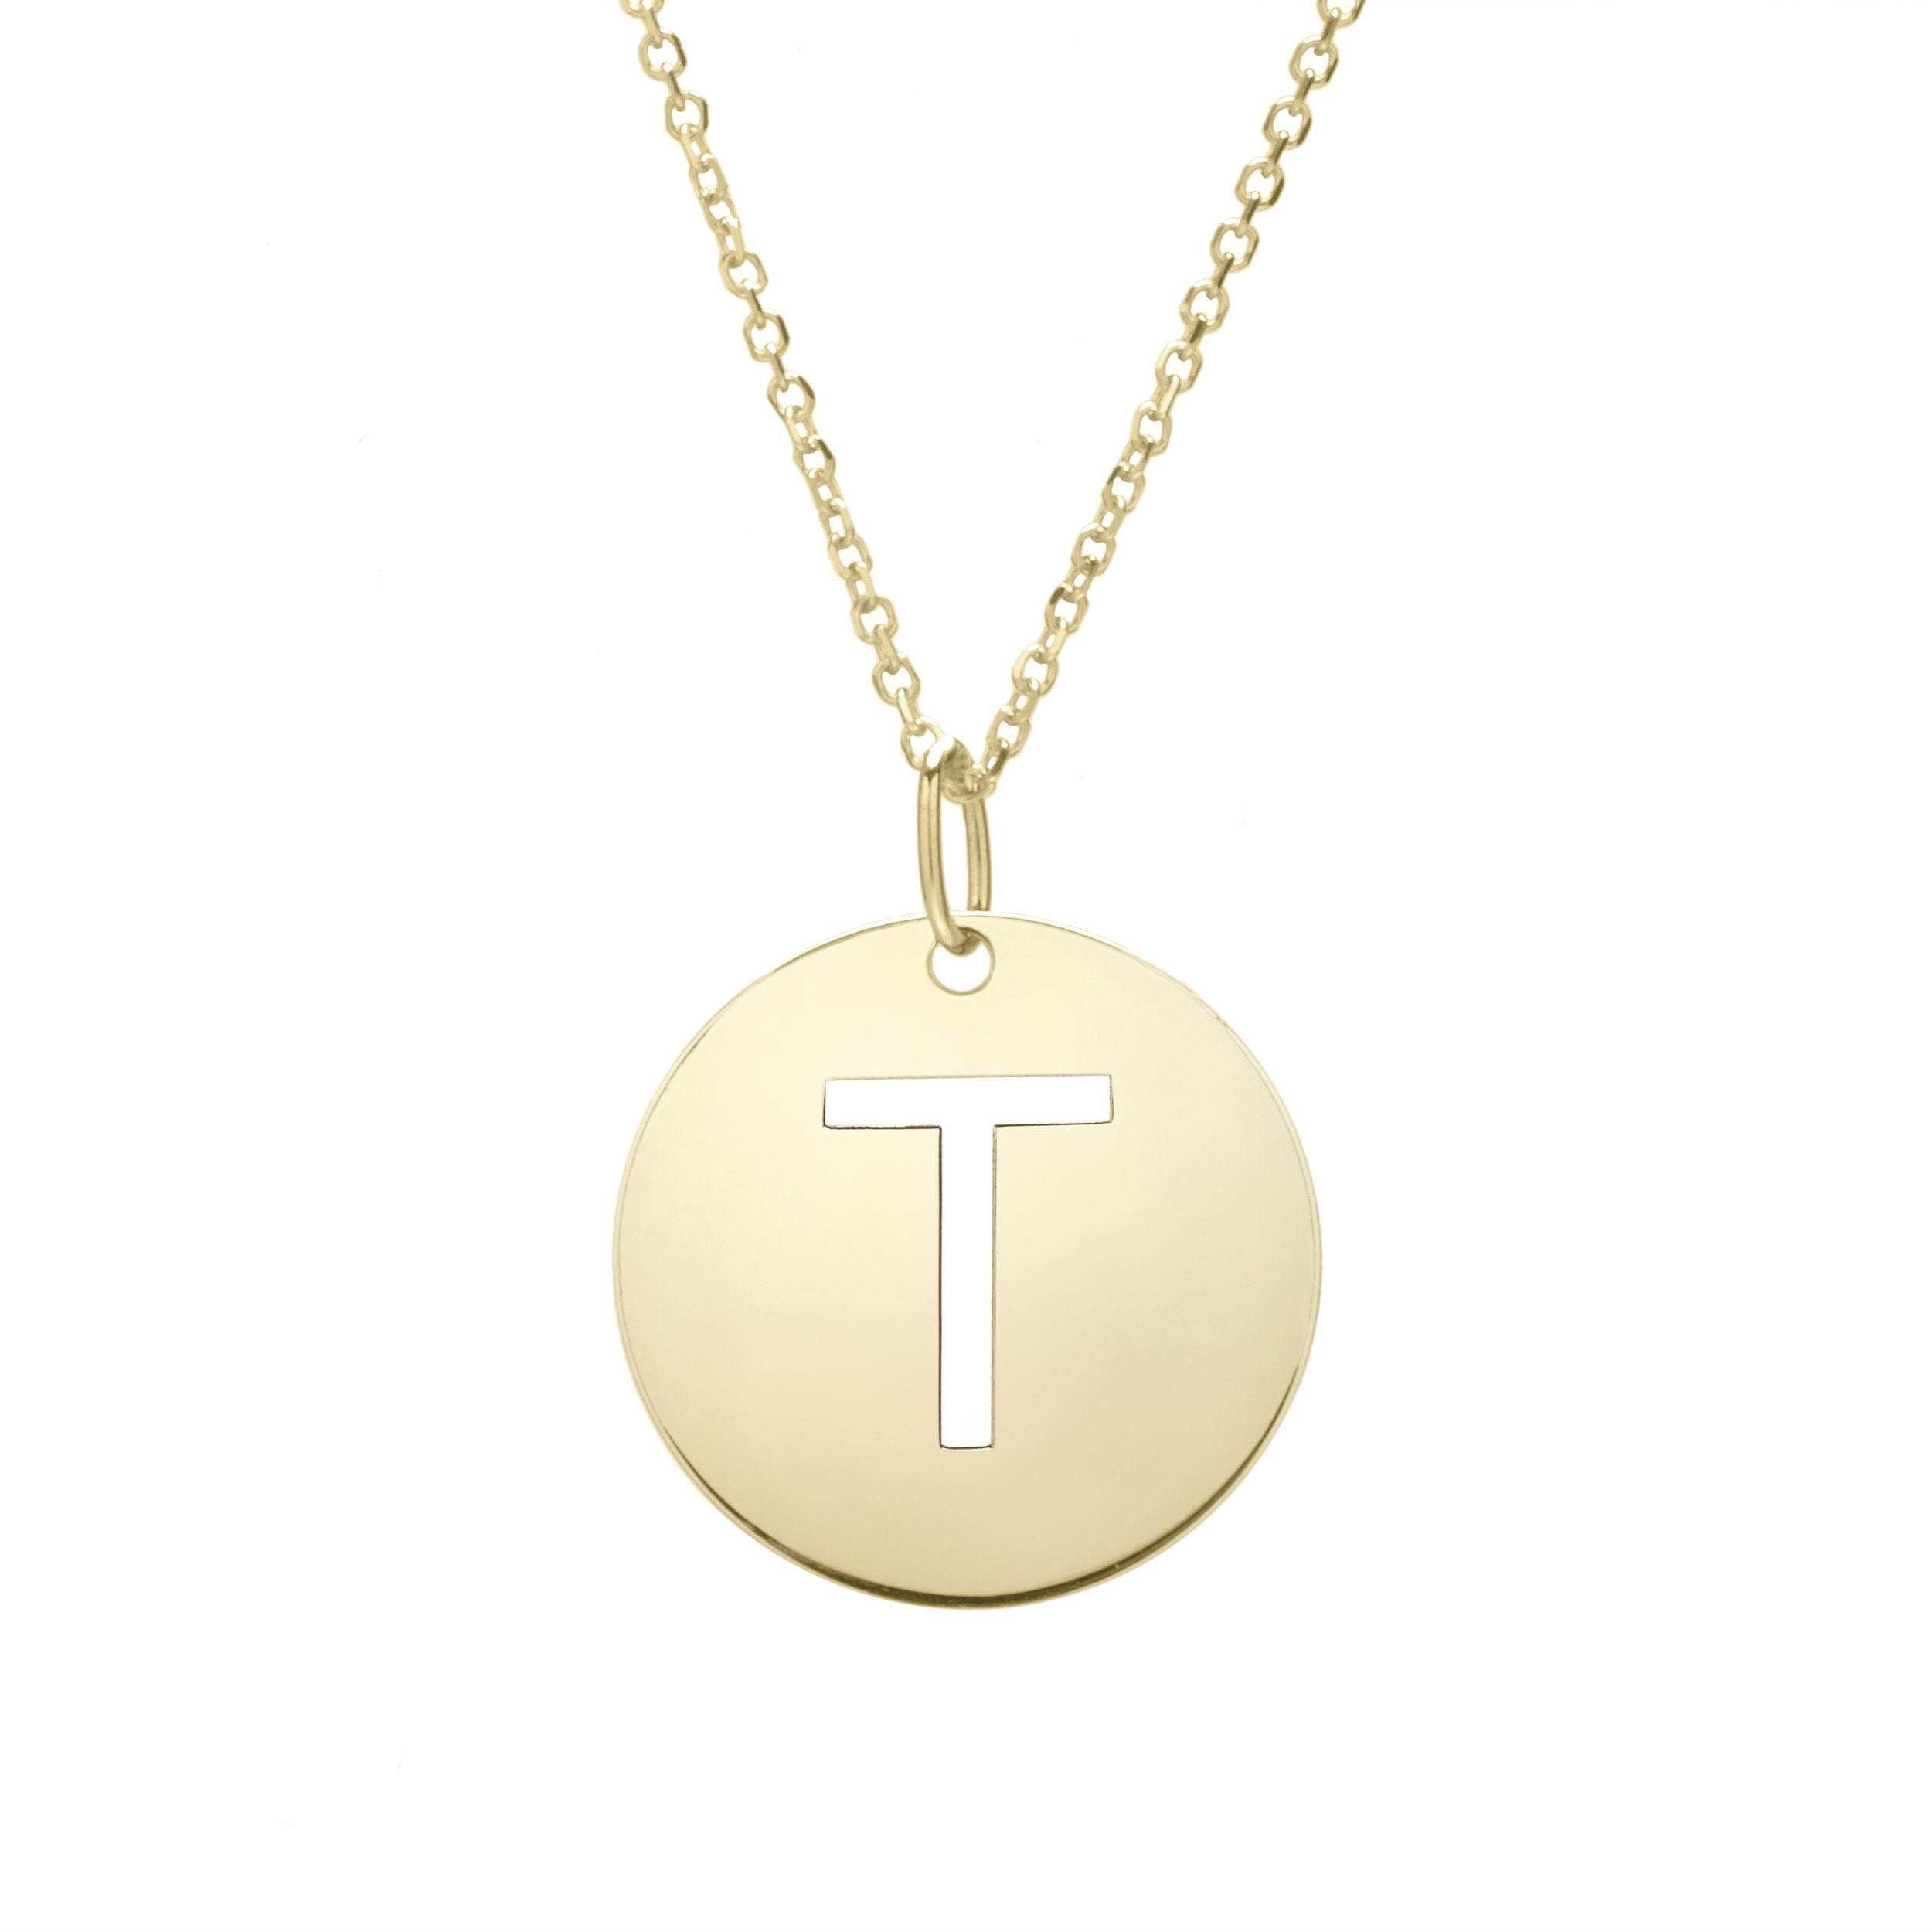 14k Yellow Gold Initial Letter Round Pendant Necklace, 18" fine designer jewelry for men and women